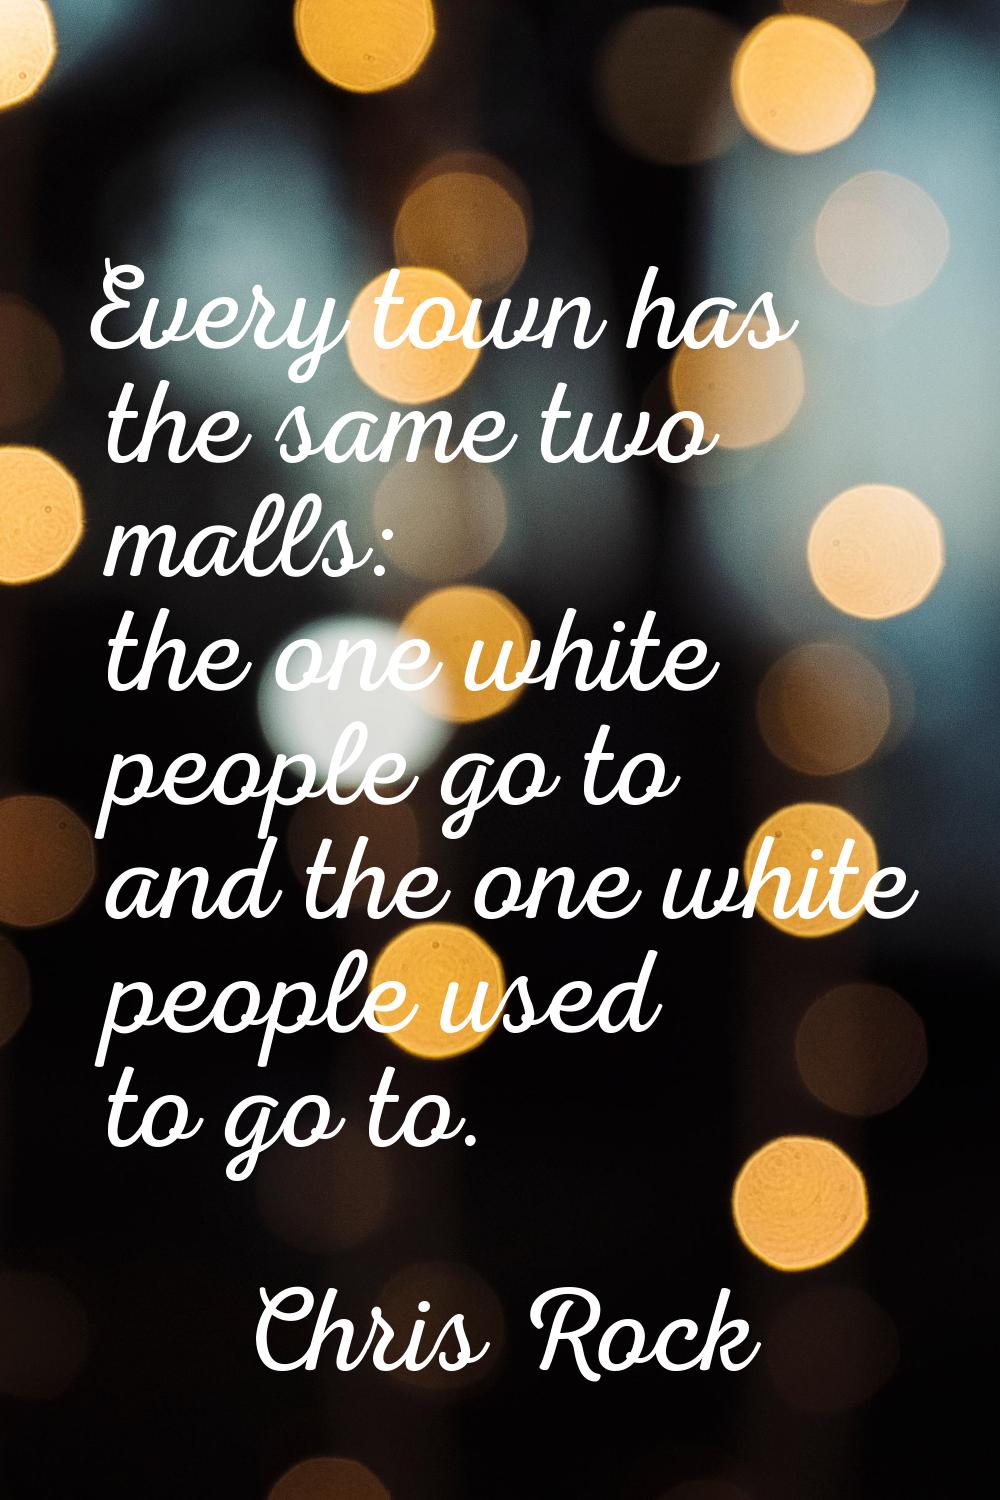 Every town has the same two malls: the one white people go to and the one white people used to go t